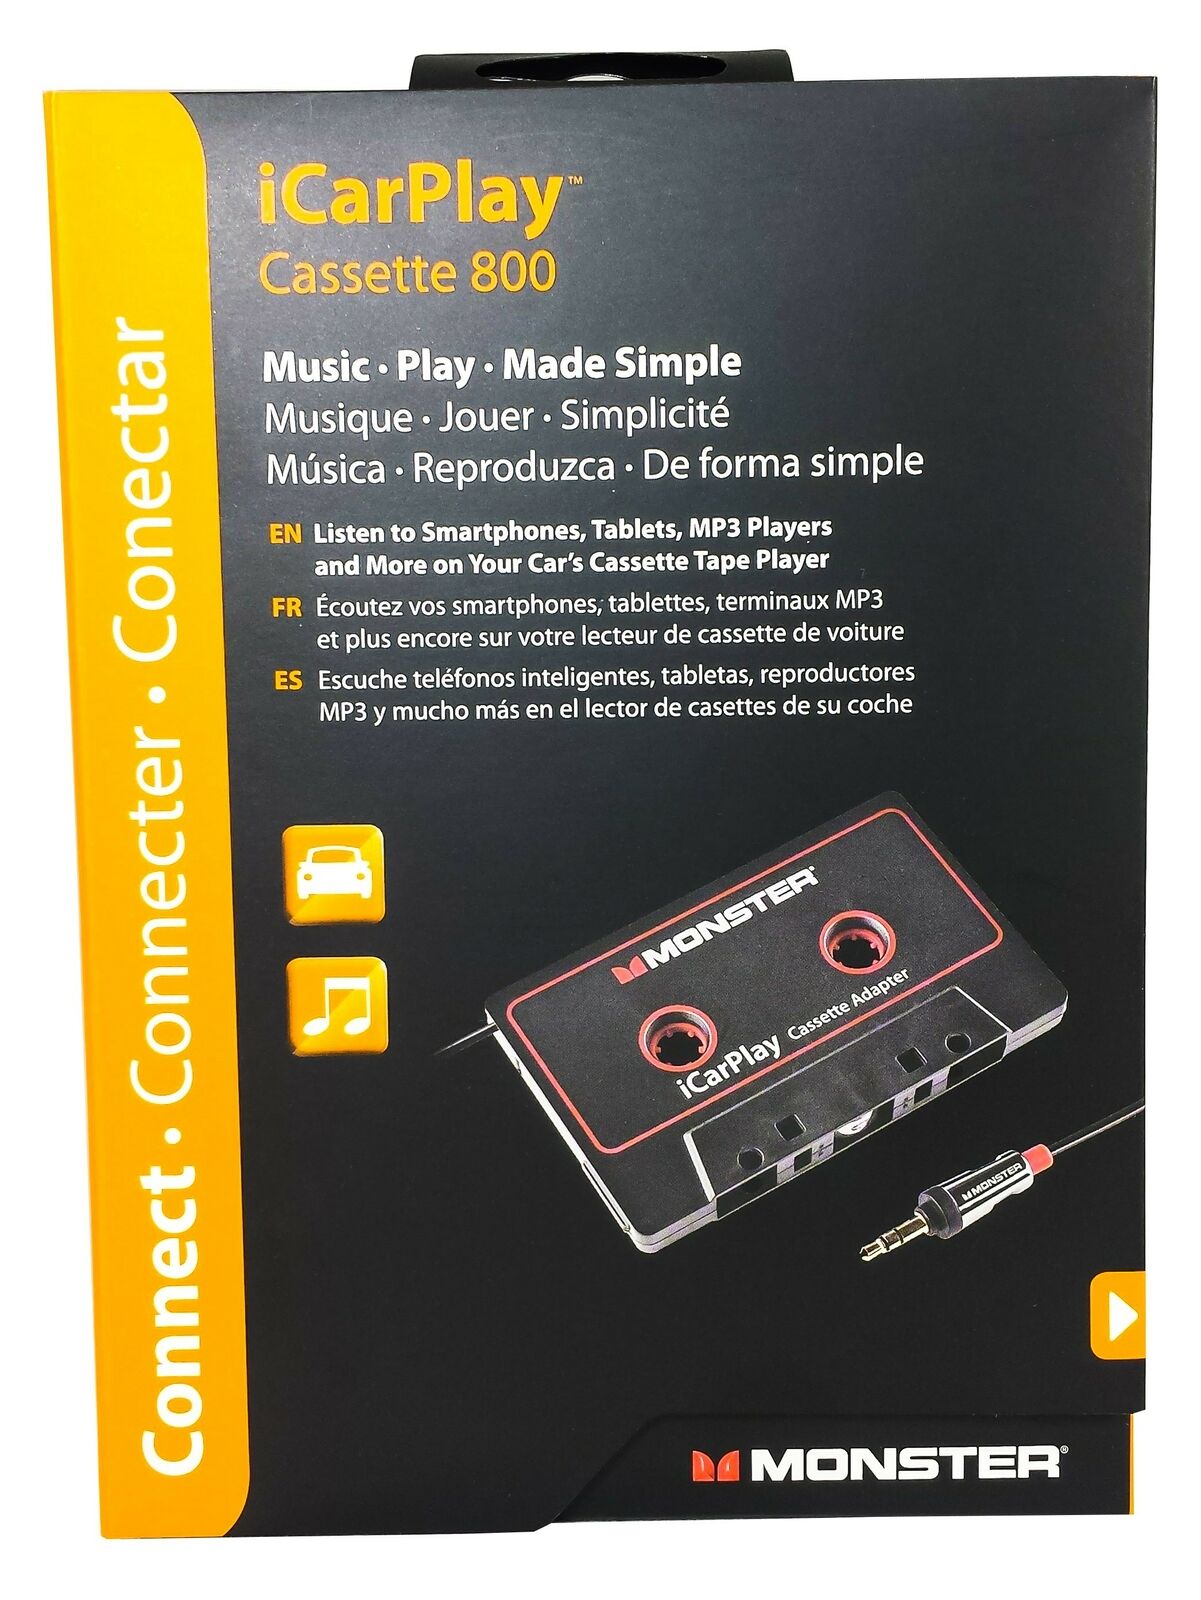 Monster Icarplay 800 Cassette Adapter - Ipod, Iphone, Android - Brand New